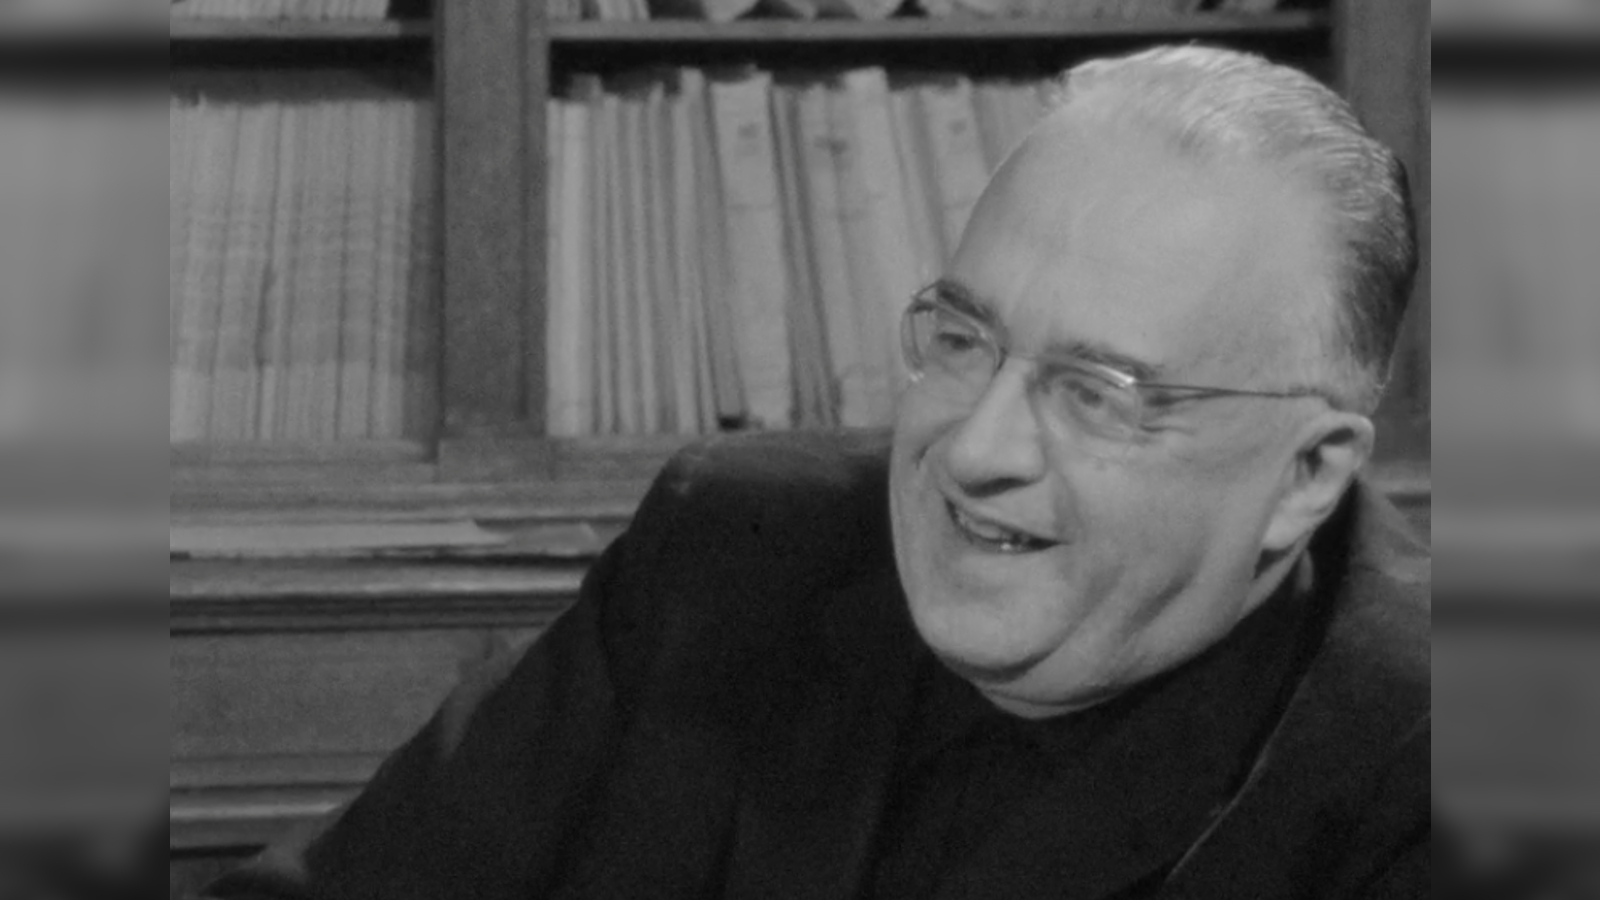 A still of Georges Lemaître smiling and talking and sitting in front of a bookshelf from the rediscovered video.